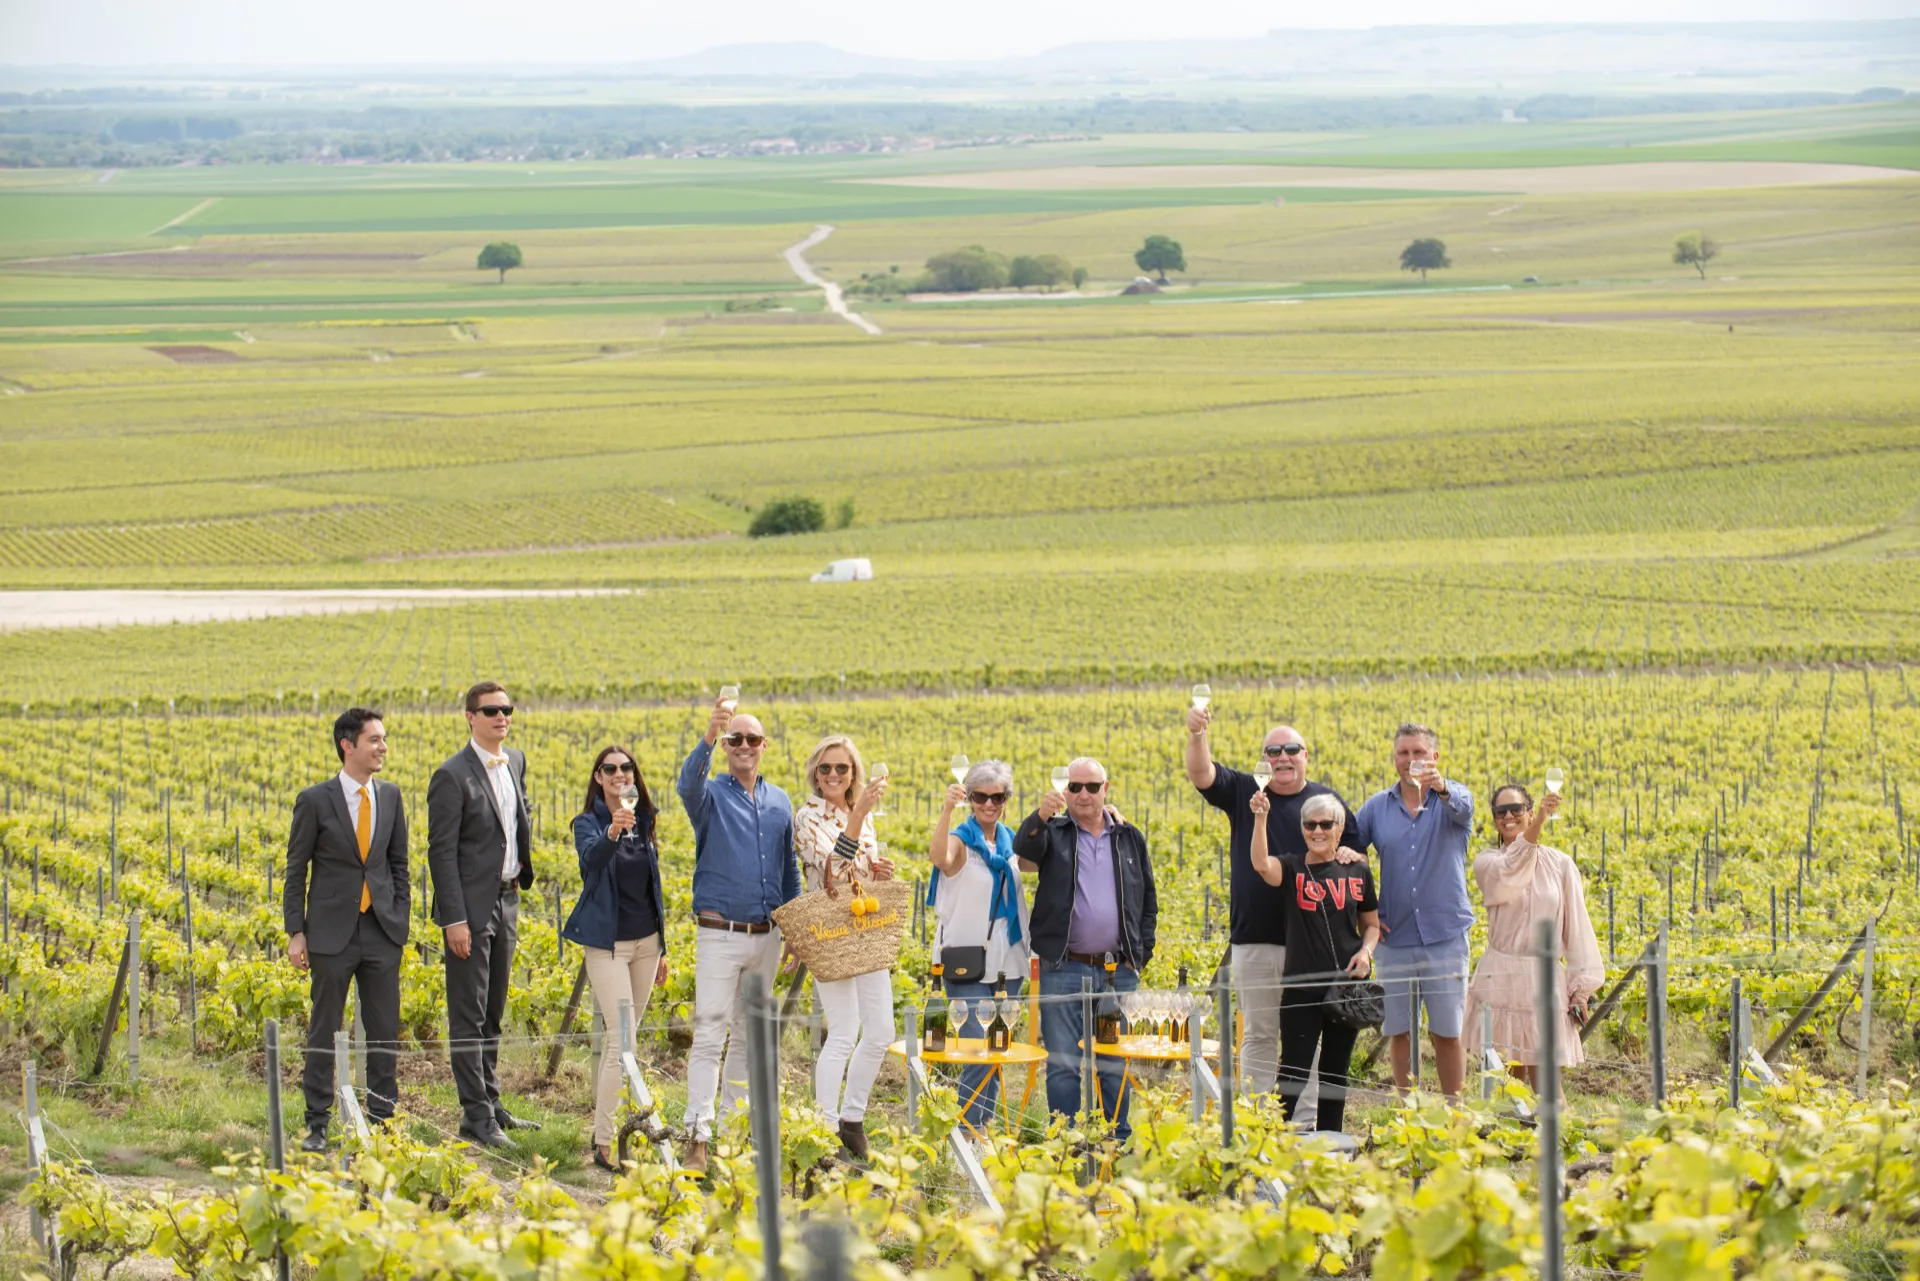 Enjoy a private tour of Champagne including renowned maisons like Ruinart or Veuve Clicquot